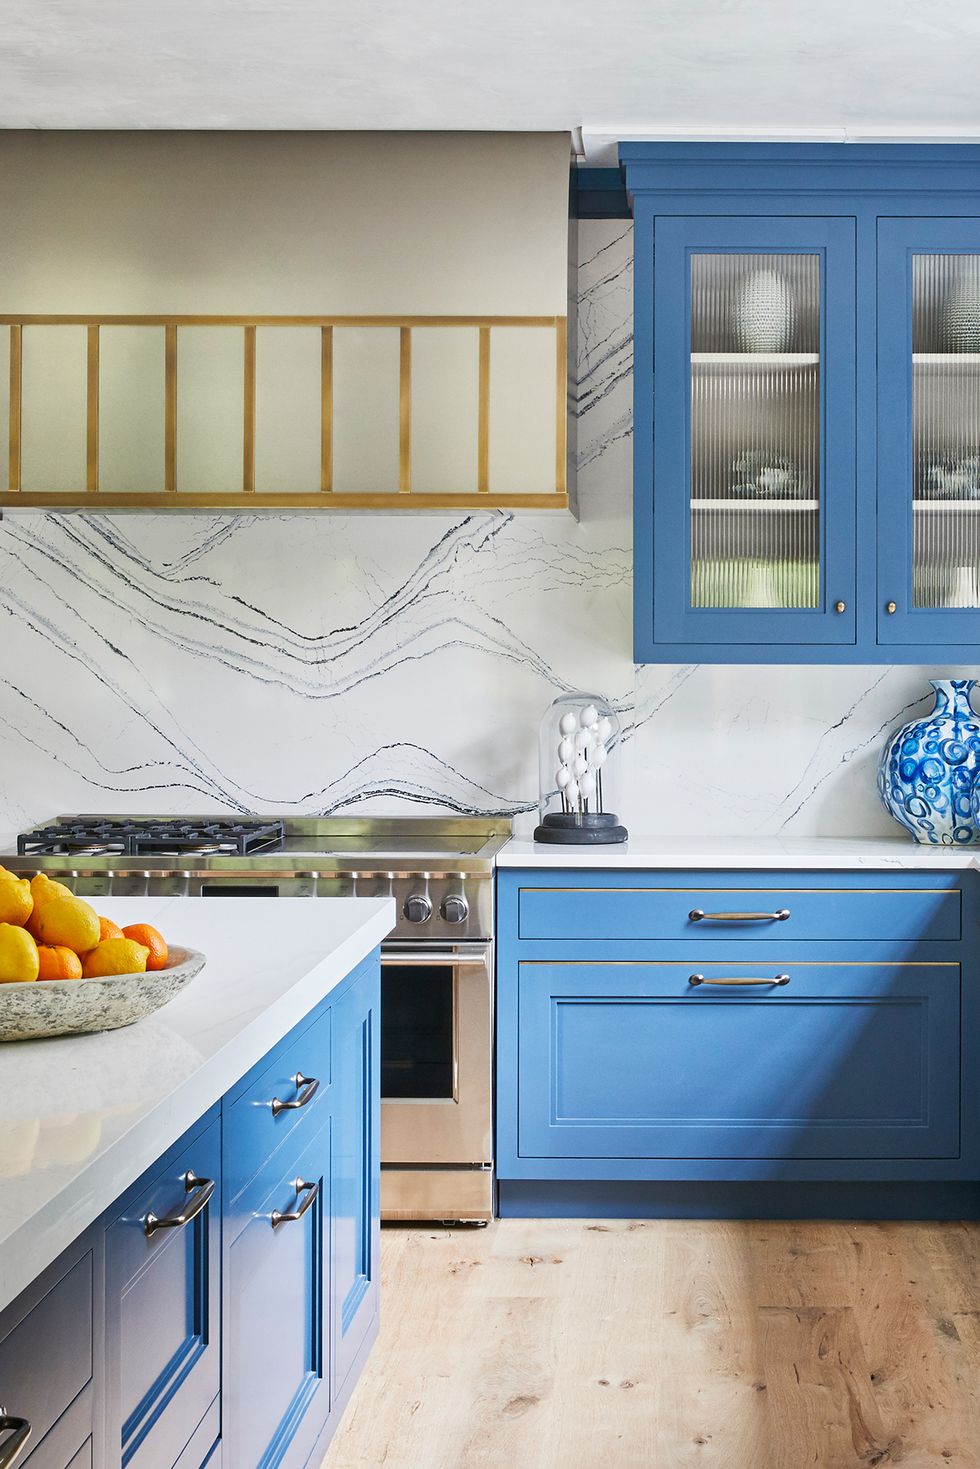 Herringbone Flooring and More Kitchen Trends That Will Be